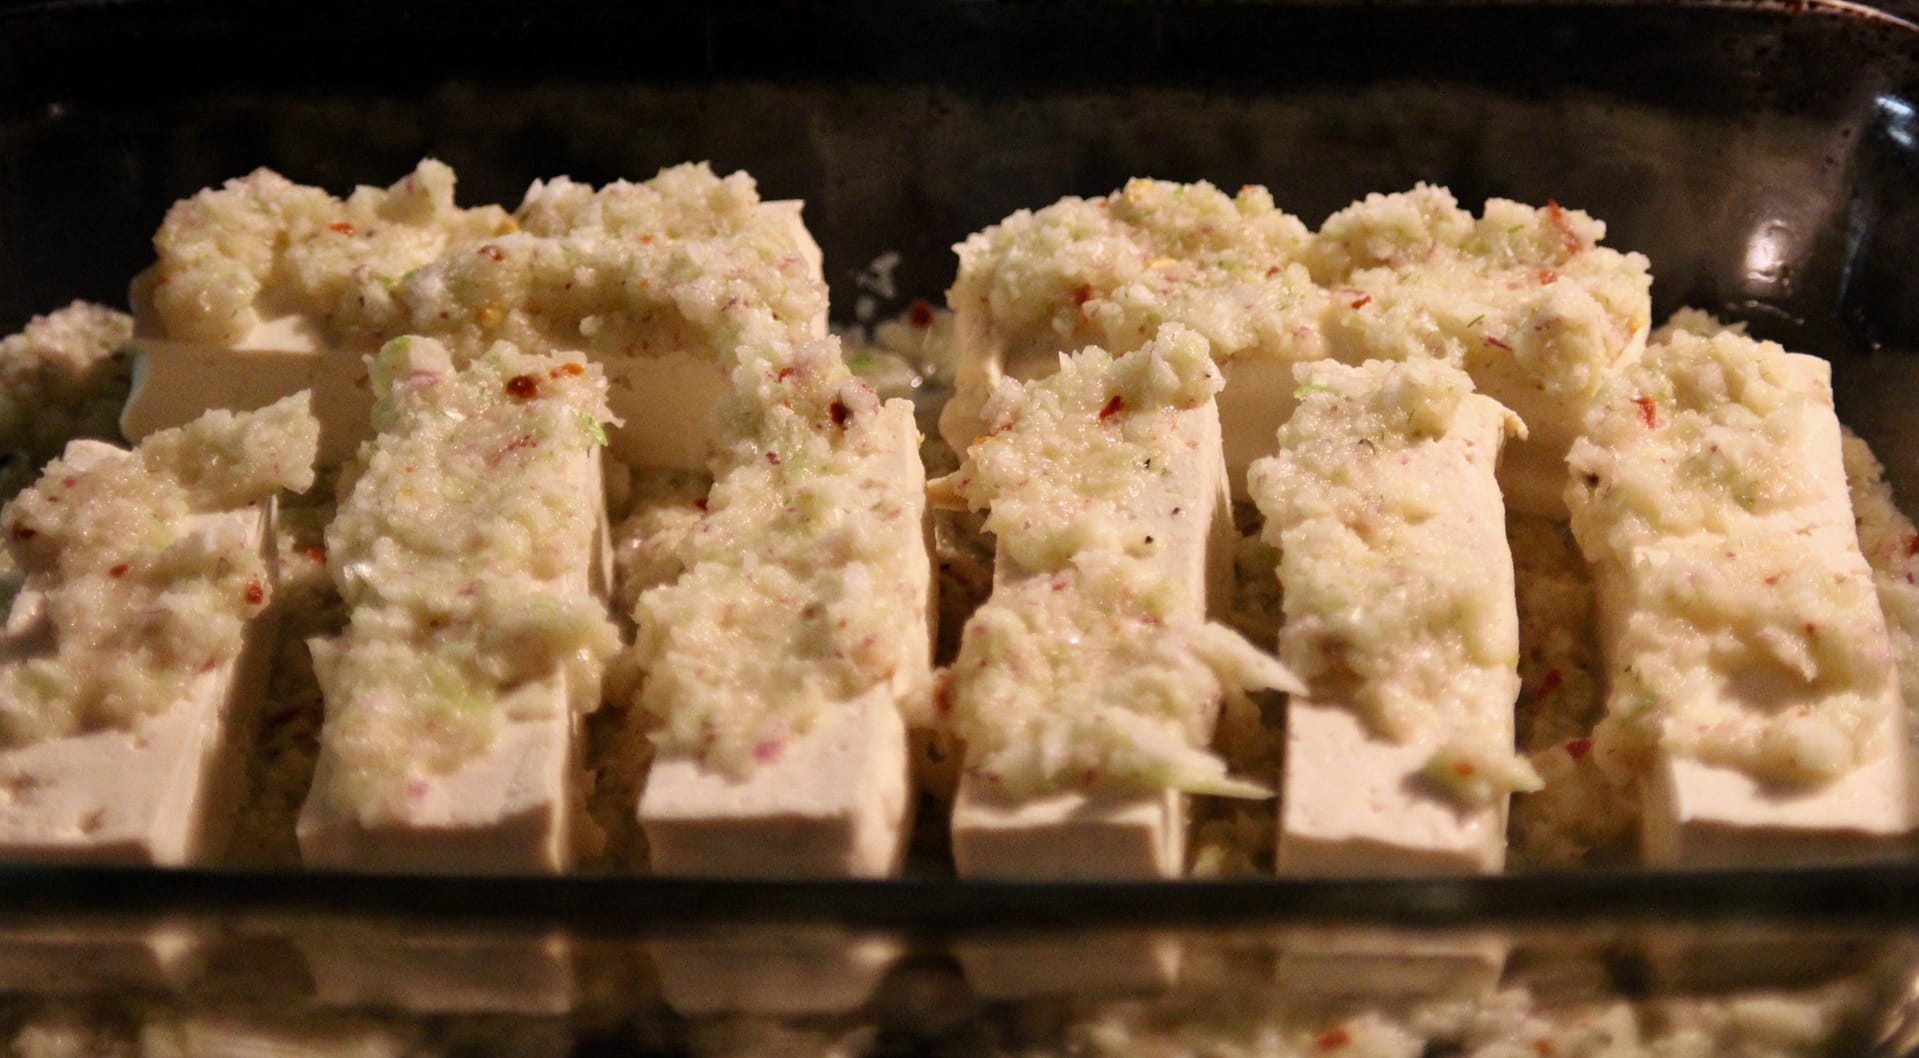 Tofu with onion and fennel mixture about to go into the oven.